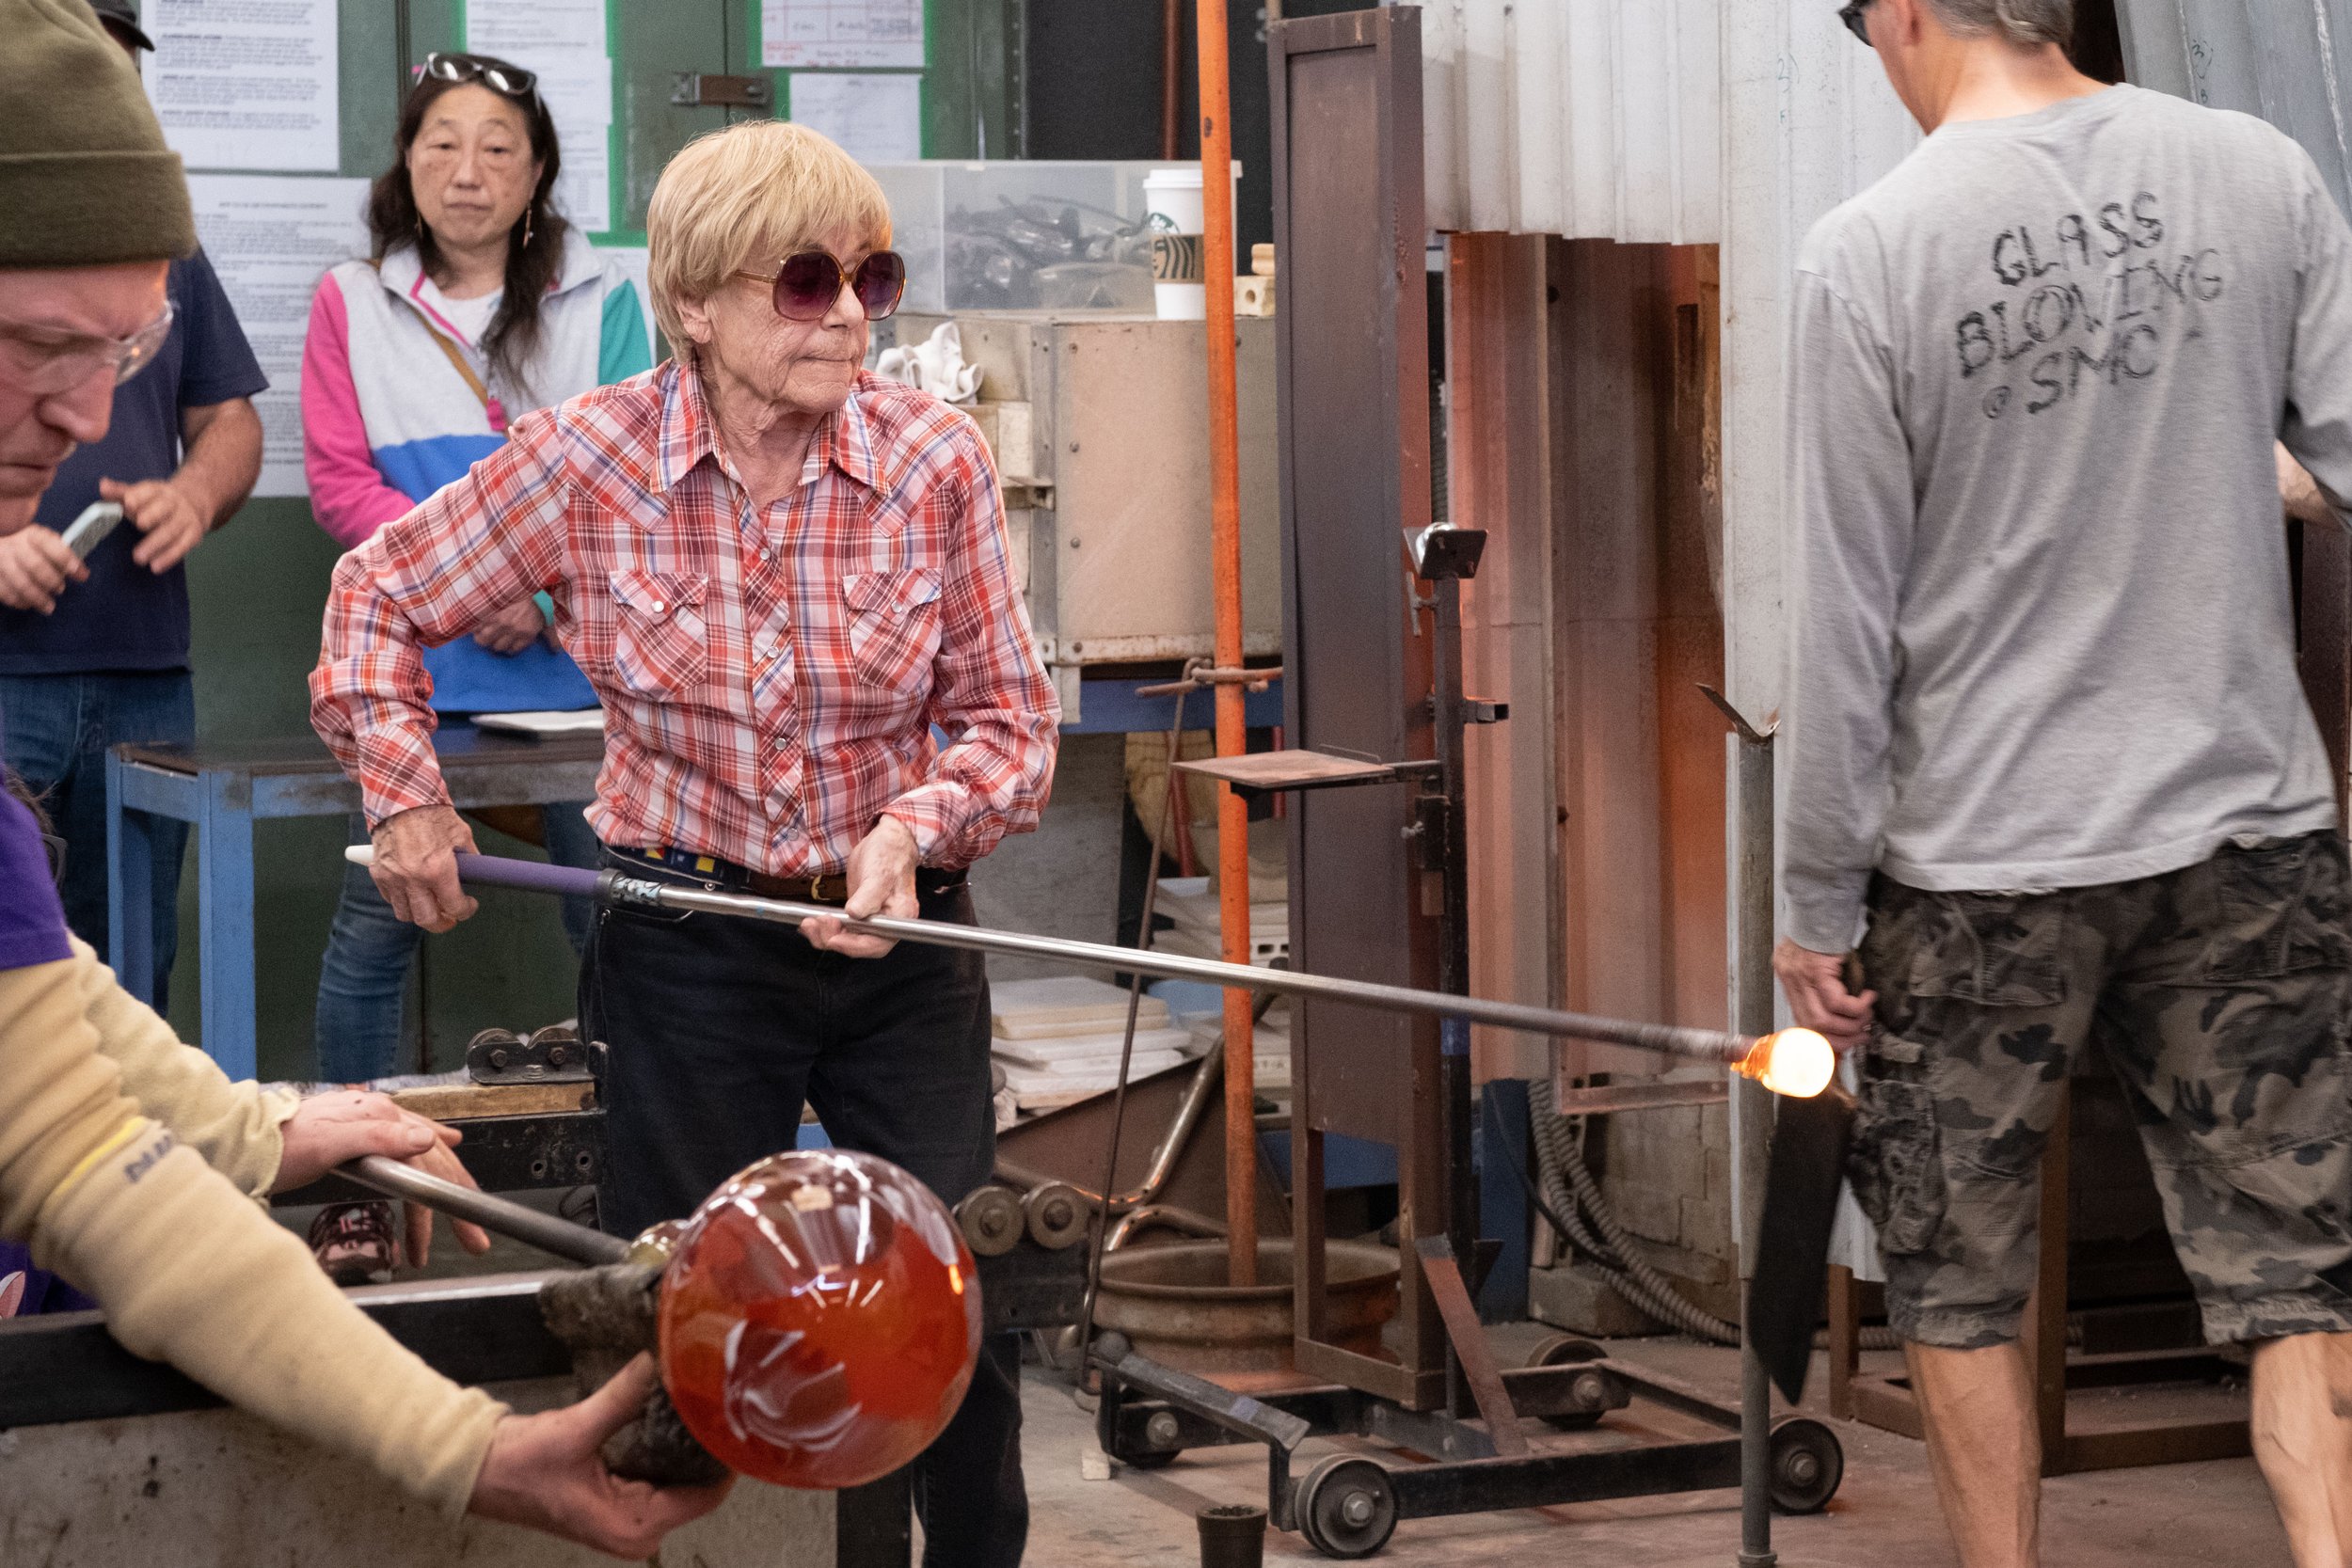  Seija Gerdt has been a part of the Santa Monica College glass blowing program since the beginning. Her birthday wish was to blow glass on her 90th birthdhday, which is in a few weeks, she says. "I never stop doing things." (Akemi Rico | The Corsair)